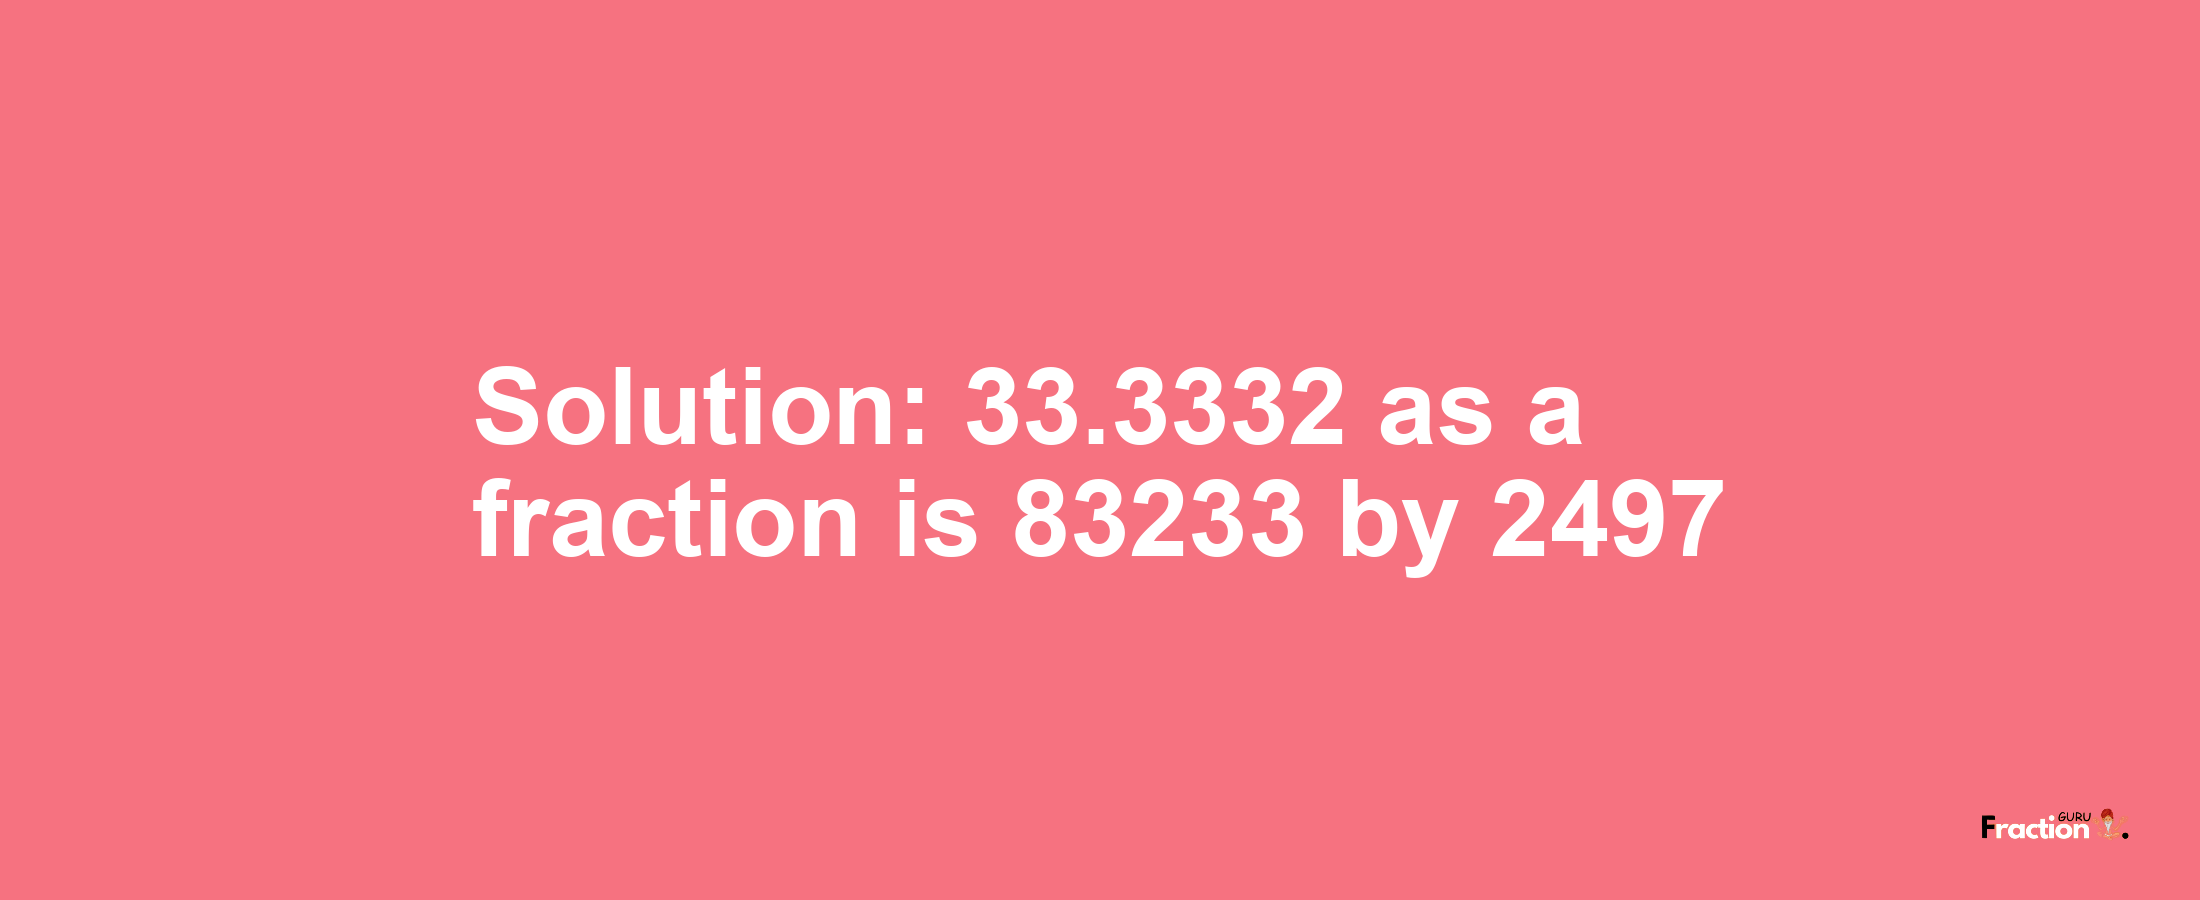 Solution:33.3332 as a fraction is 83233/2497